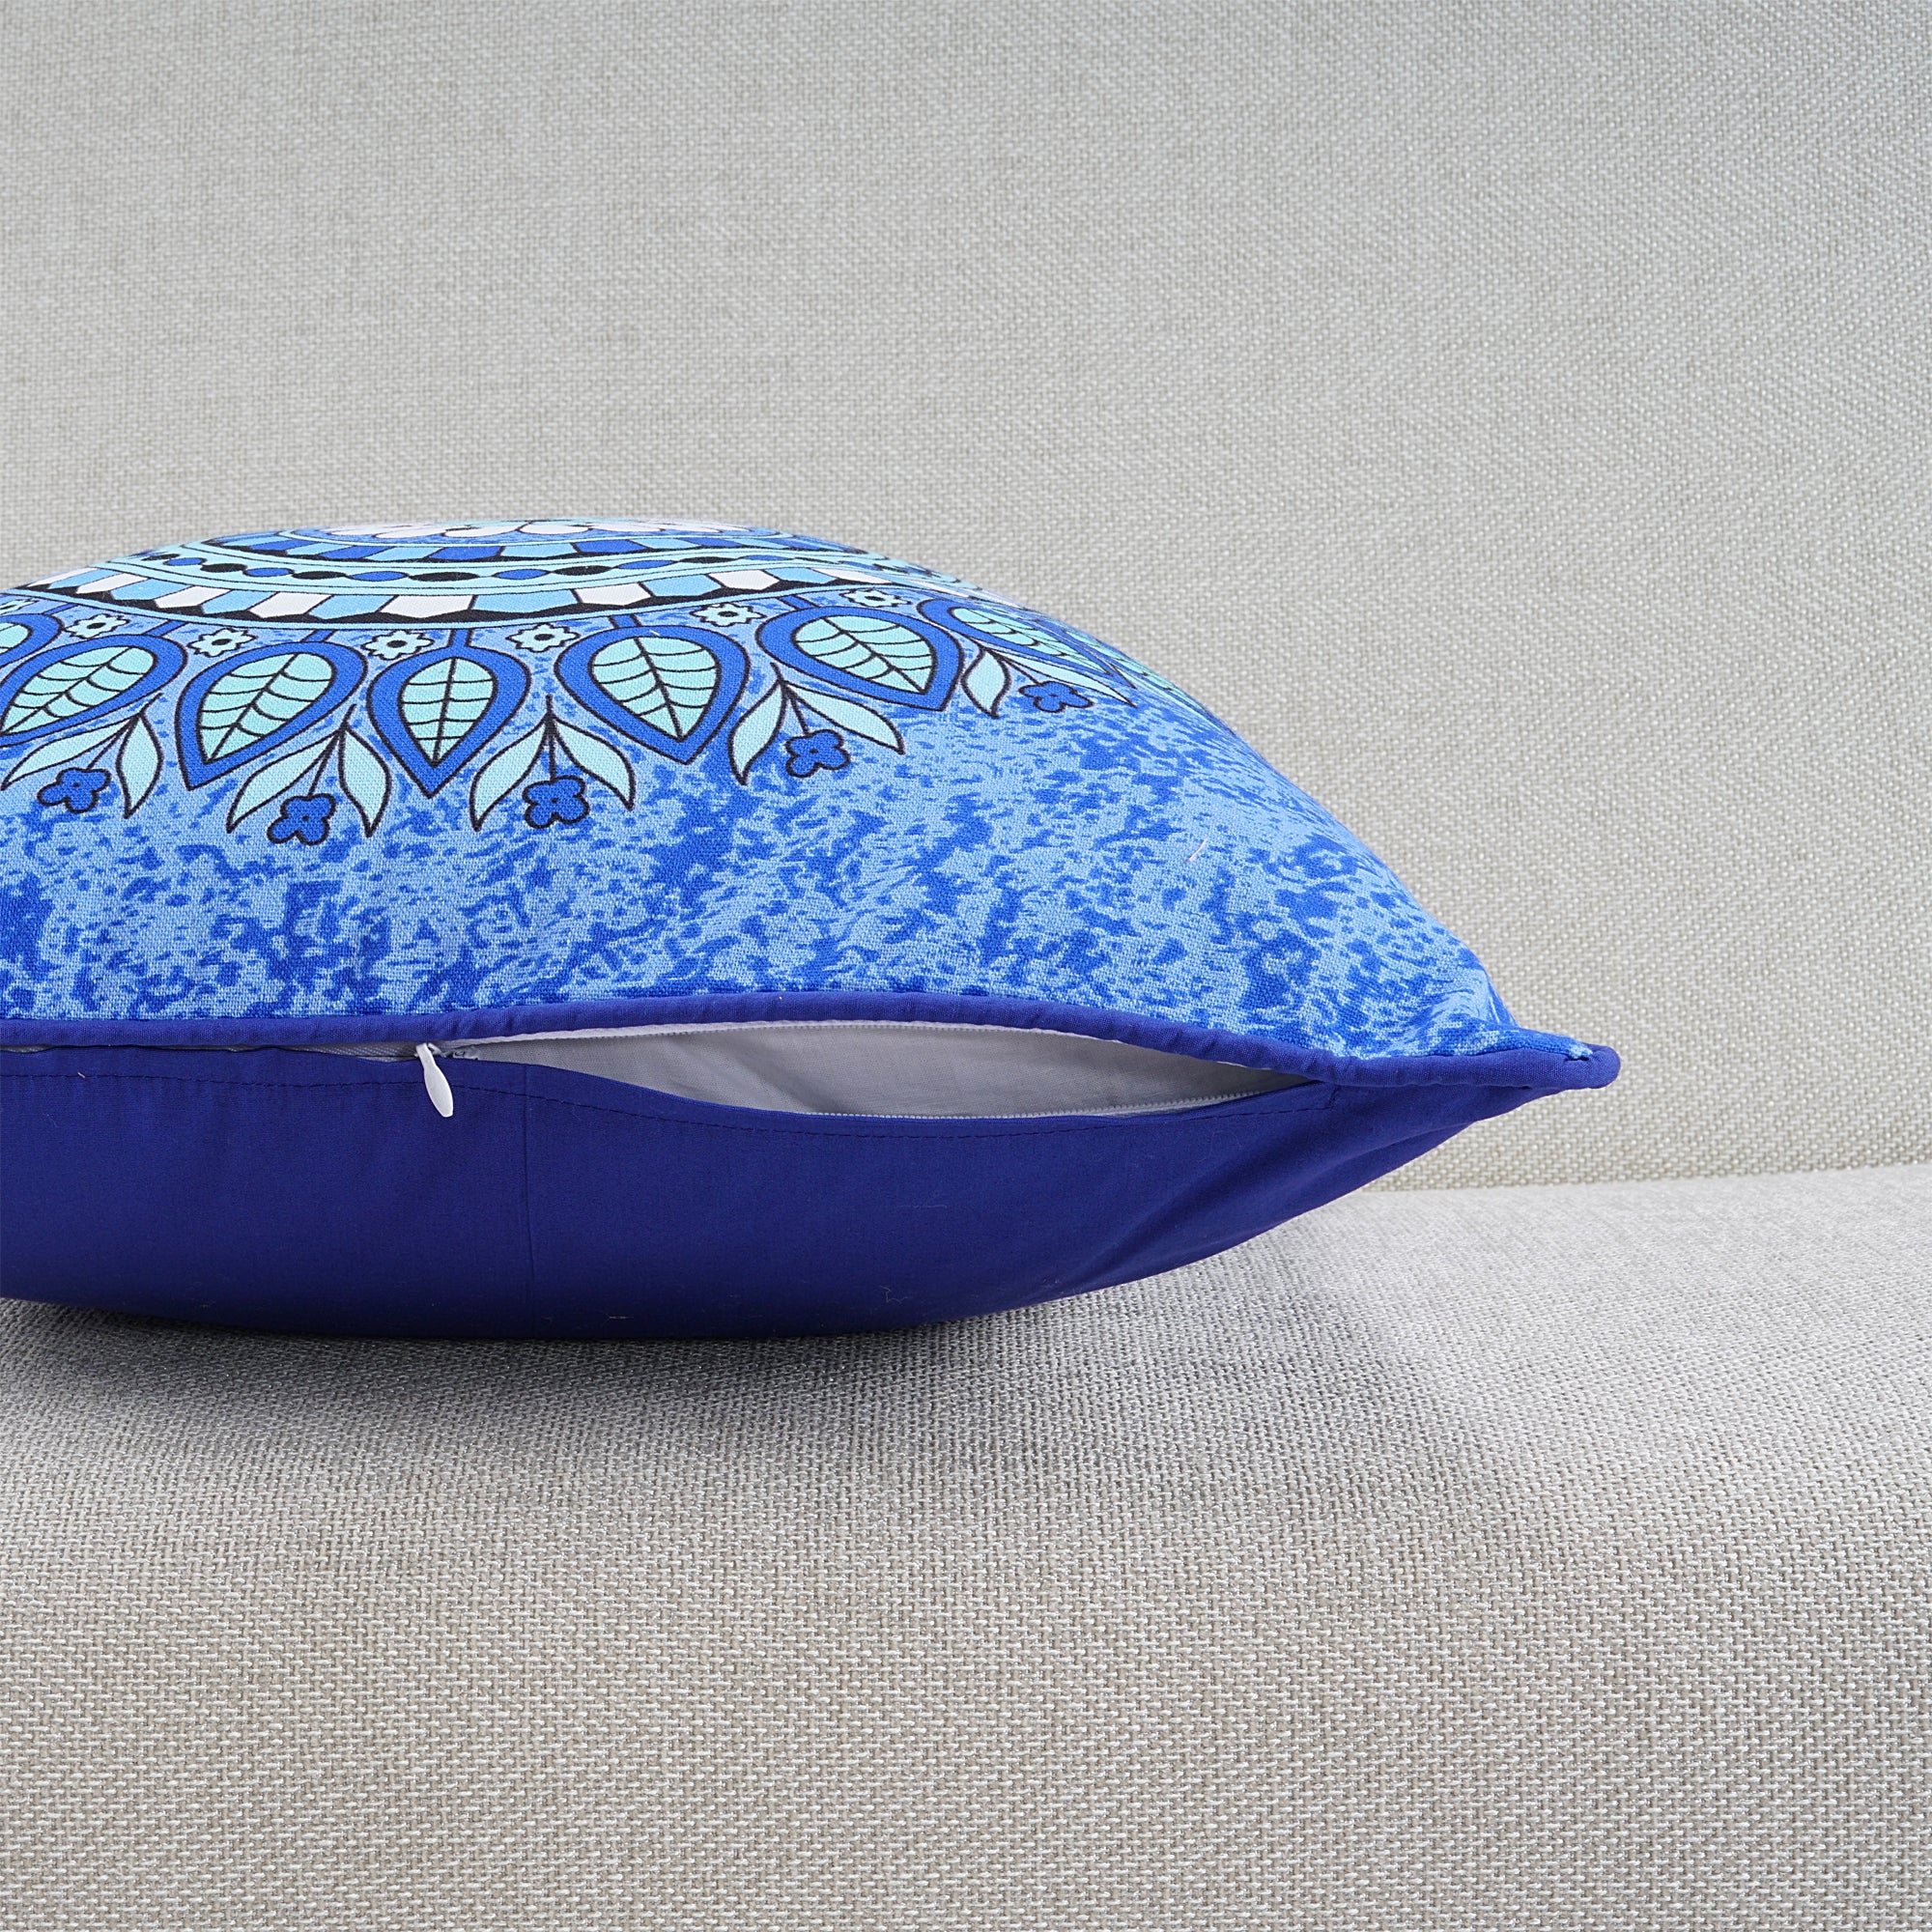 Soft Digital Traditional print Cotton Cushion Cover in Blue & Aqua online at best prices